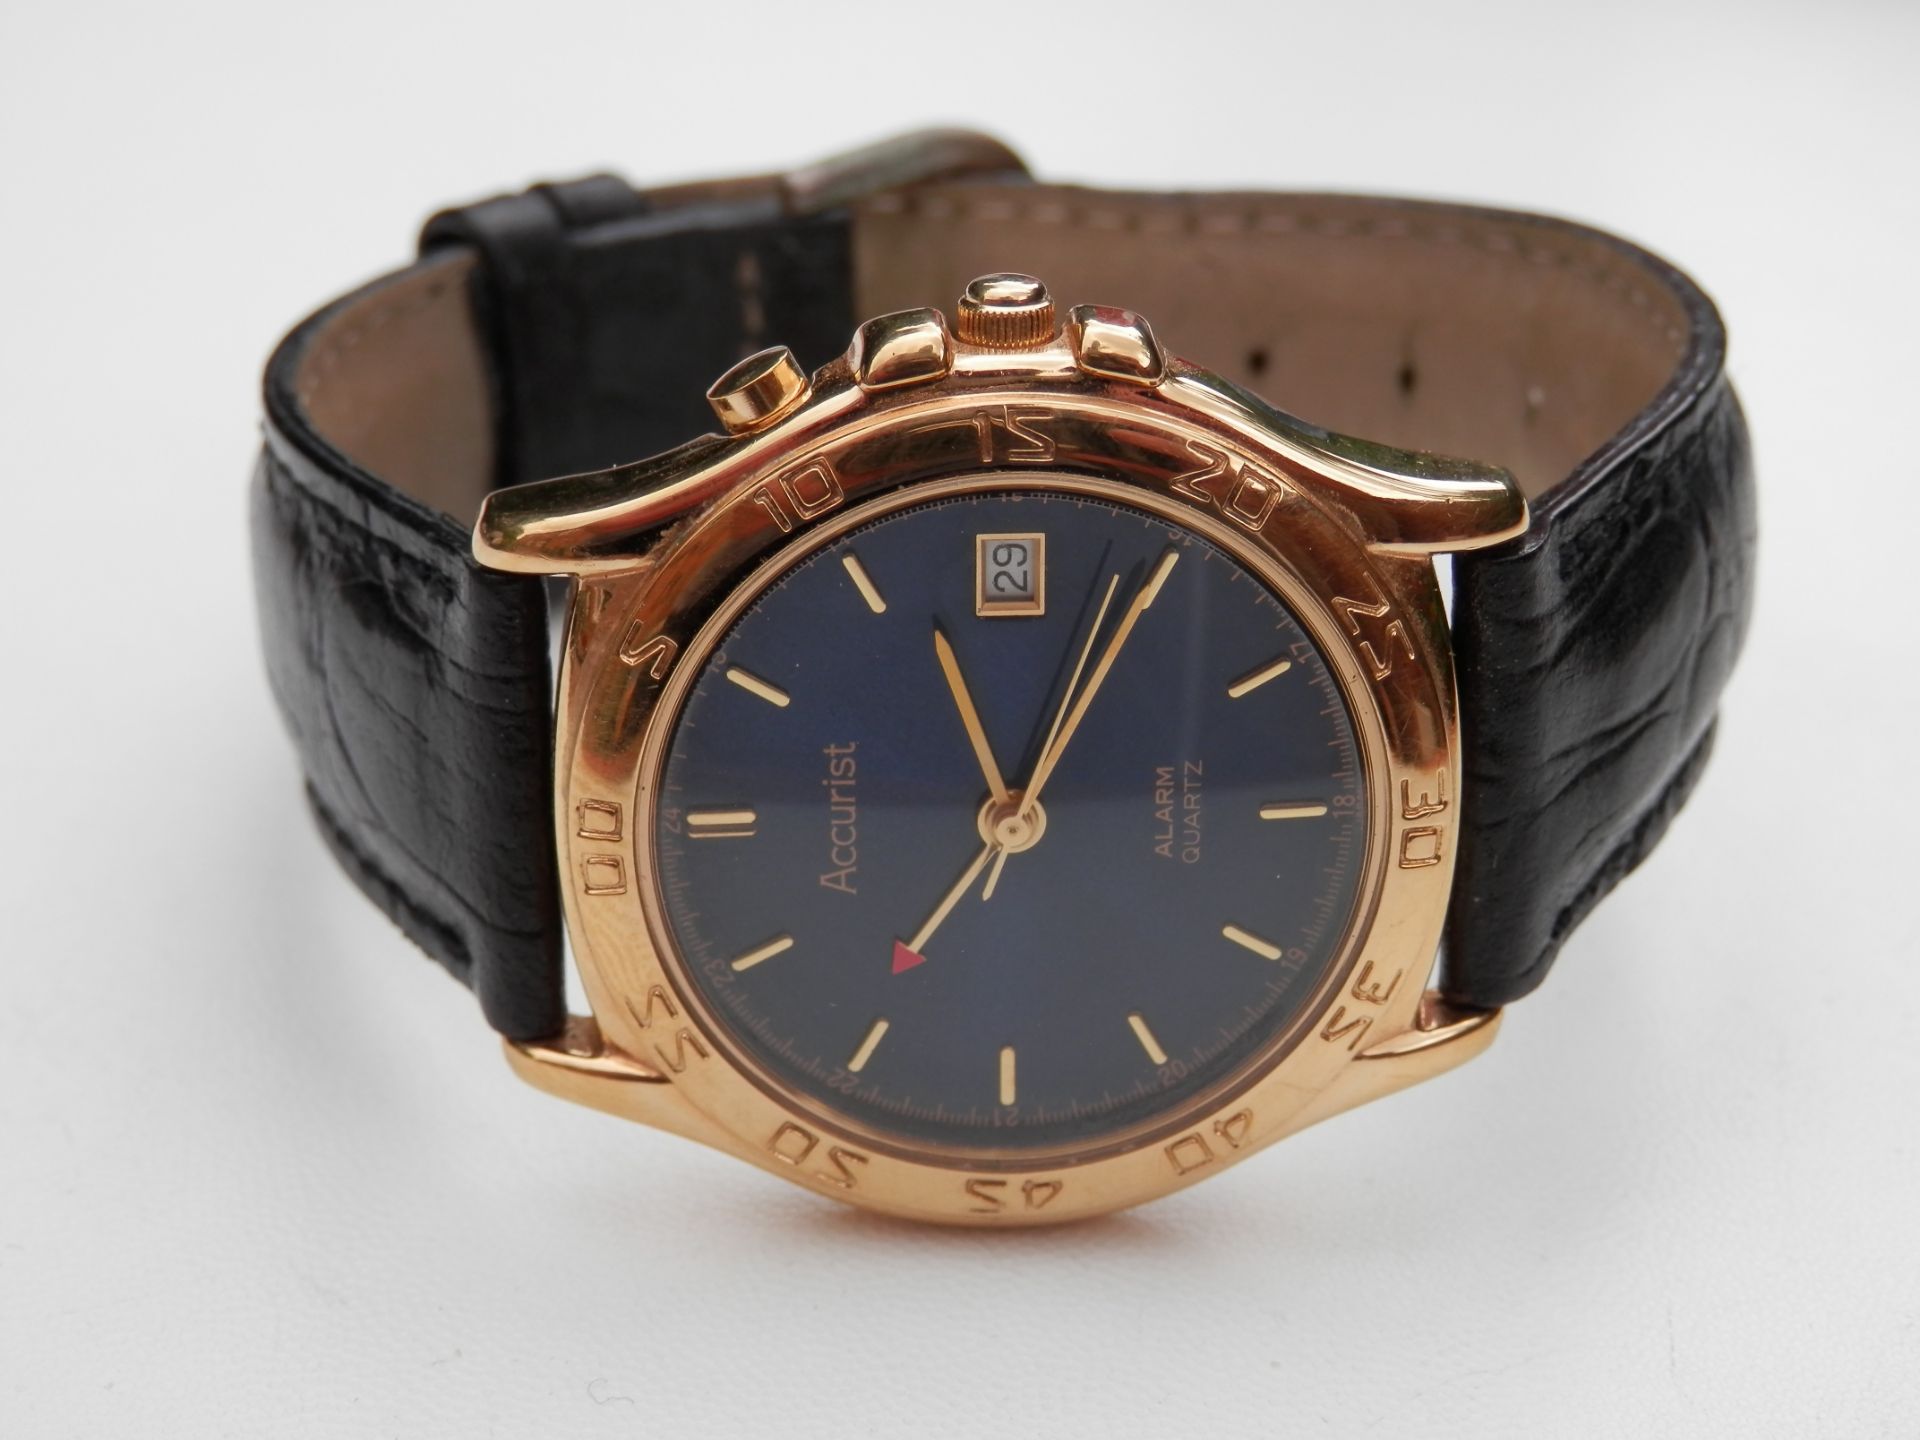 FULLY WORKING 1990S ACCURIST GENTS GOLD PLATED ANALOGUE ALARM QUARTZ WATCH, METALLIC BLUE DIAL. - Image 4 of 8